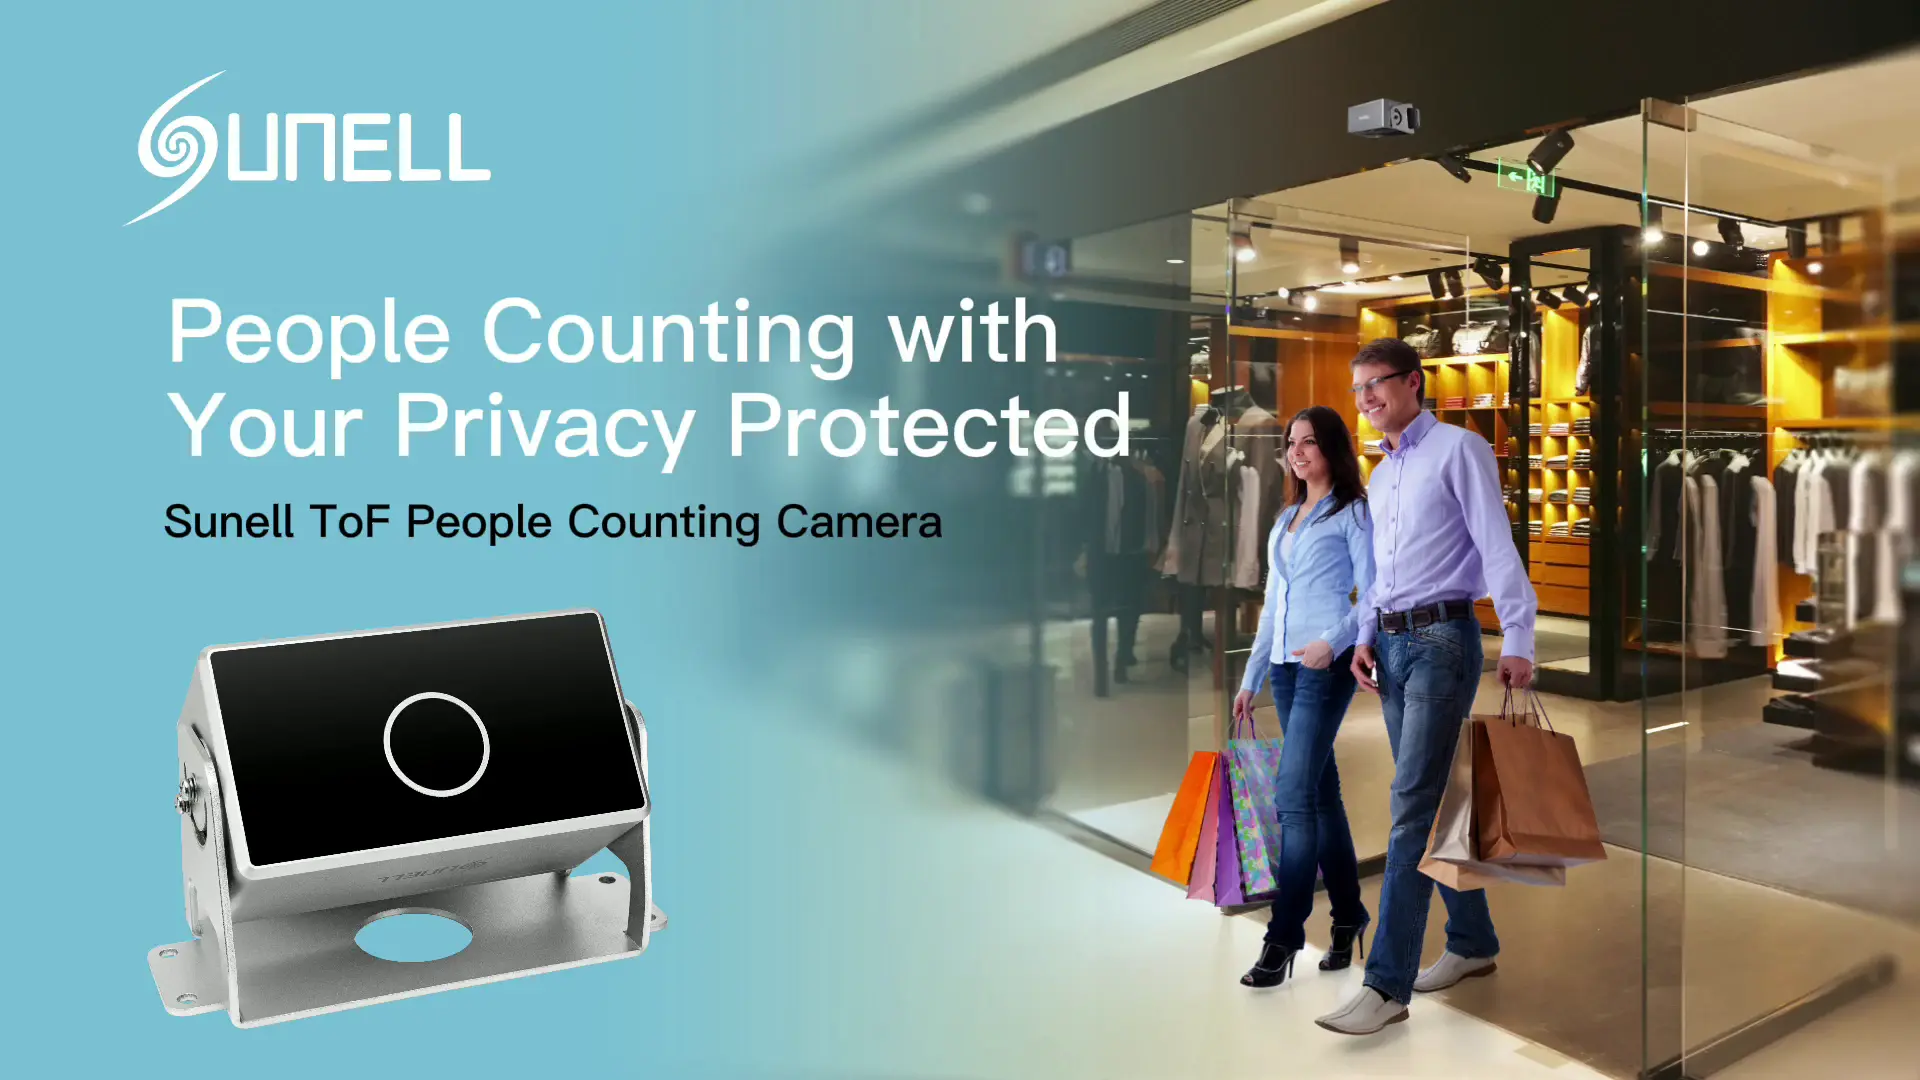 Sunell ToF People Counting Camera